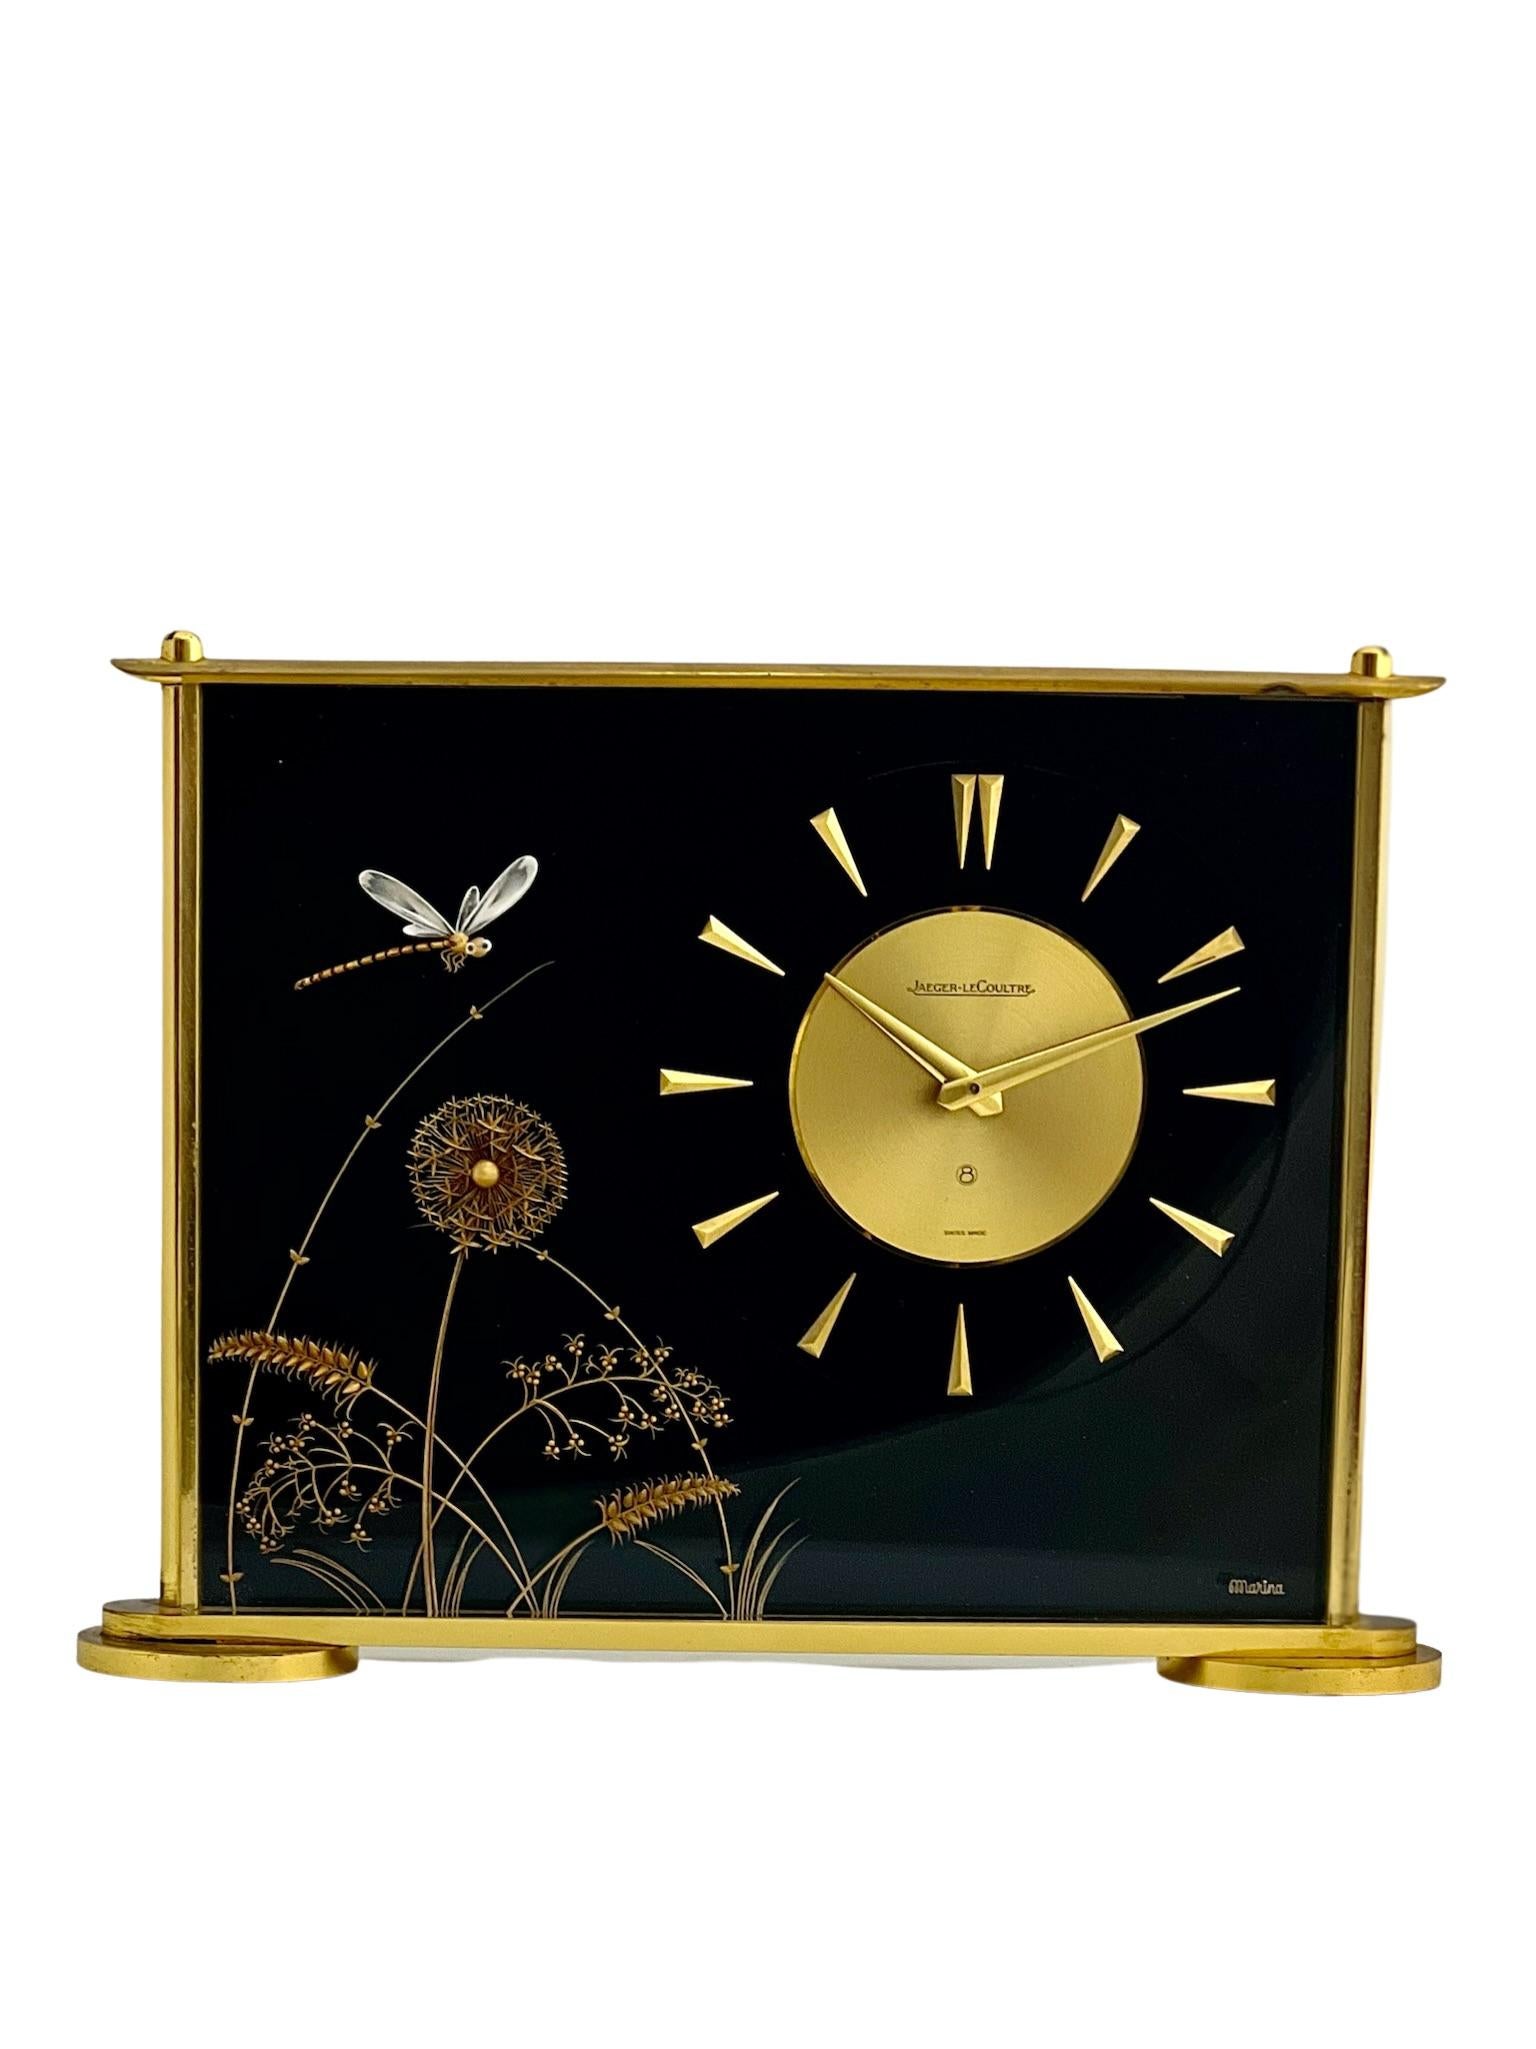 Jaeger LeCoultre Mid Century Marina Clock Model No. 486 In Good Condition For Sale In London, GB